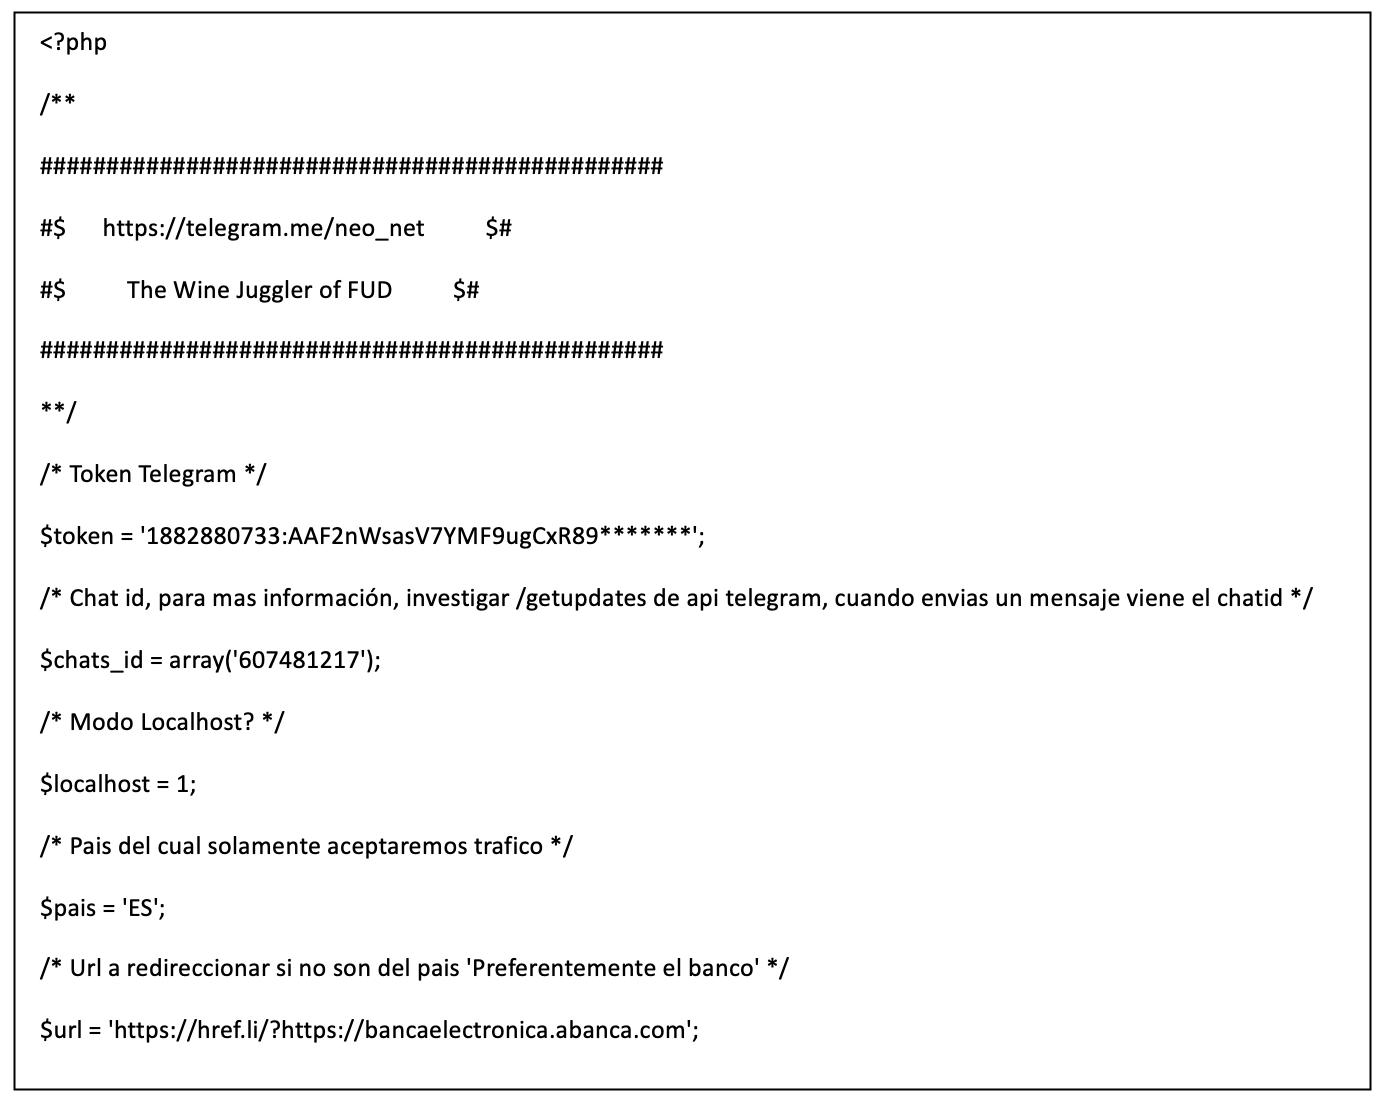 NeoNet Configuration for a phishing panel targeting Abanca